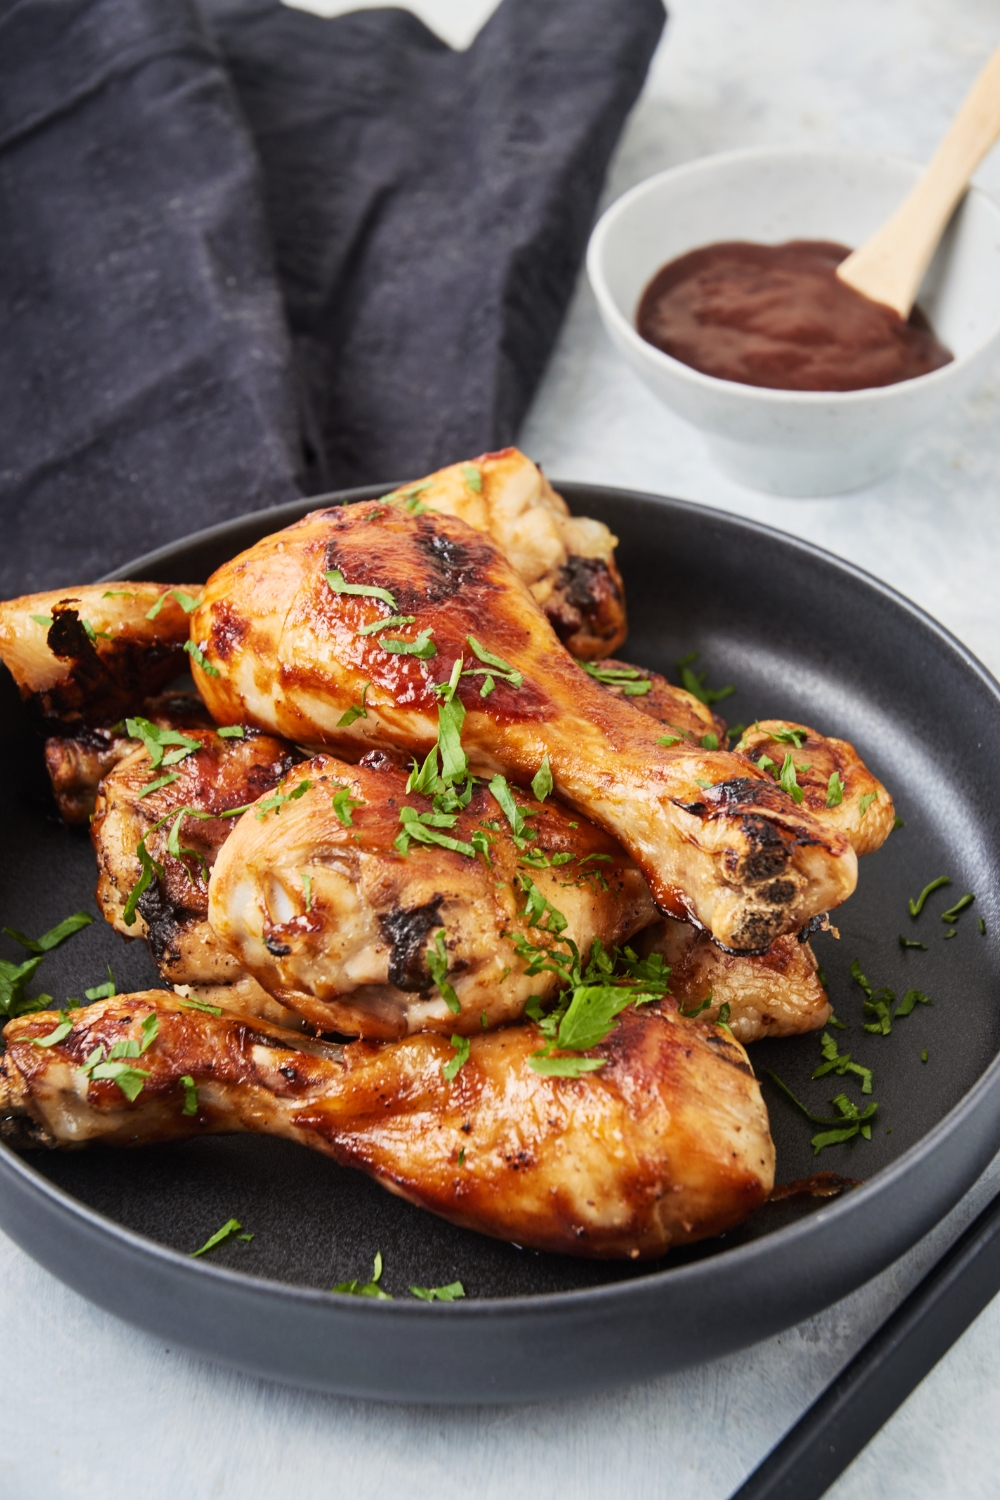 A pile of barbecue chicken drumsticks on a black plate garnished with fresh herbs and a bowl of barbecue sauce is next to it.